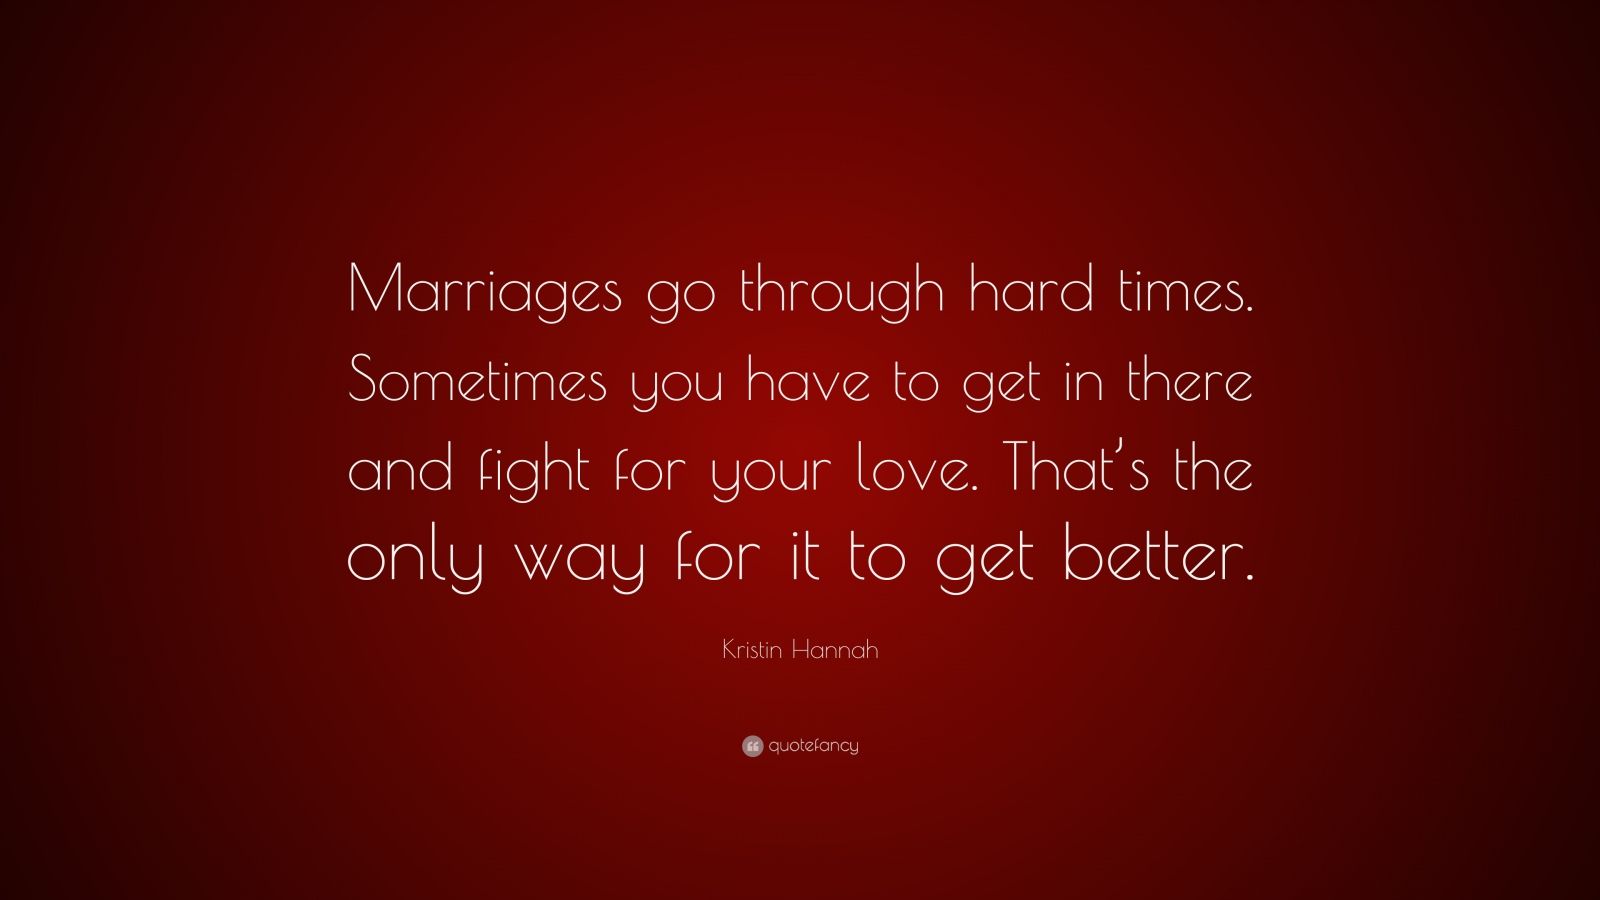 Kristin Hannah Quote “Marriages go through hard times Sometimes you have to